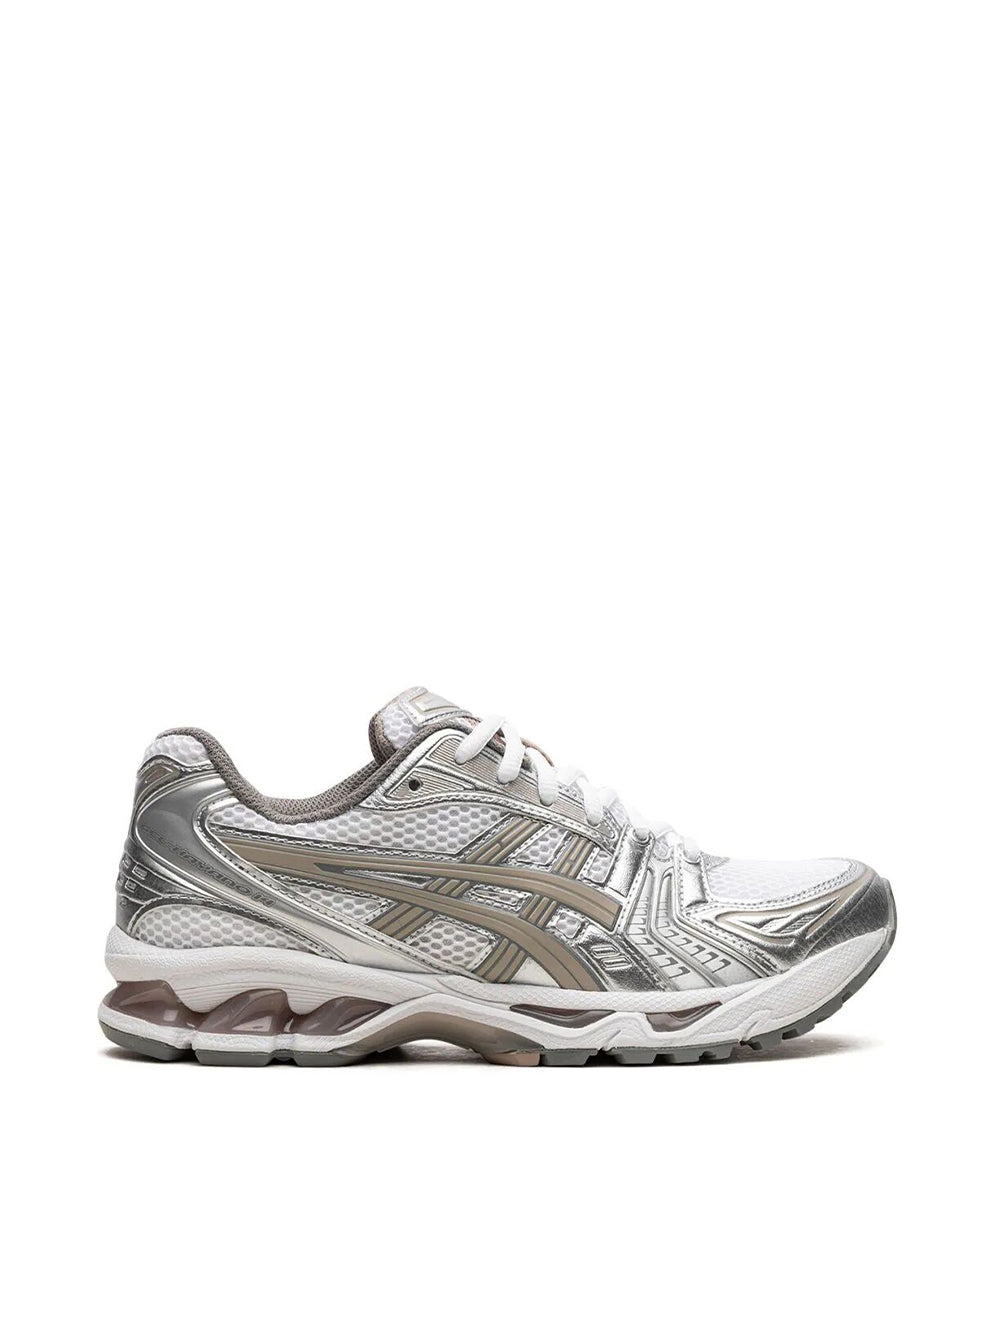 White and Silver Gel-Kayano 14 sneakers